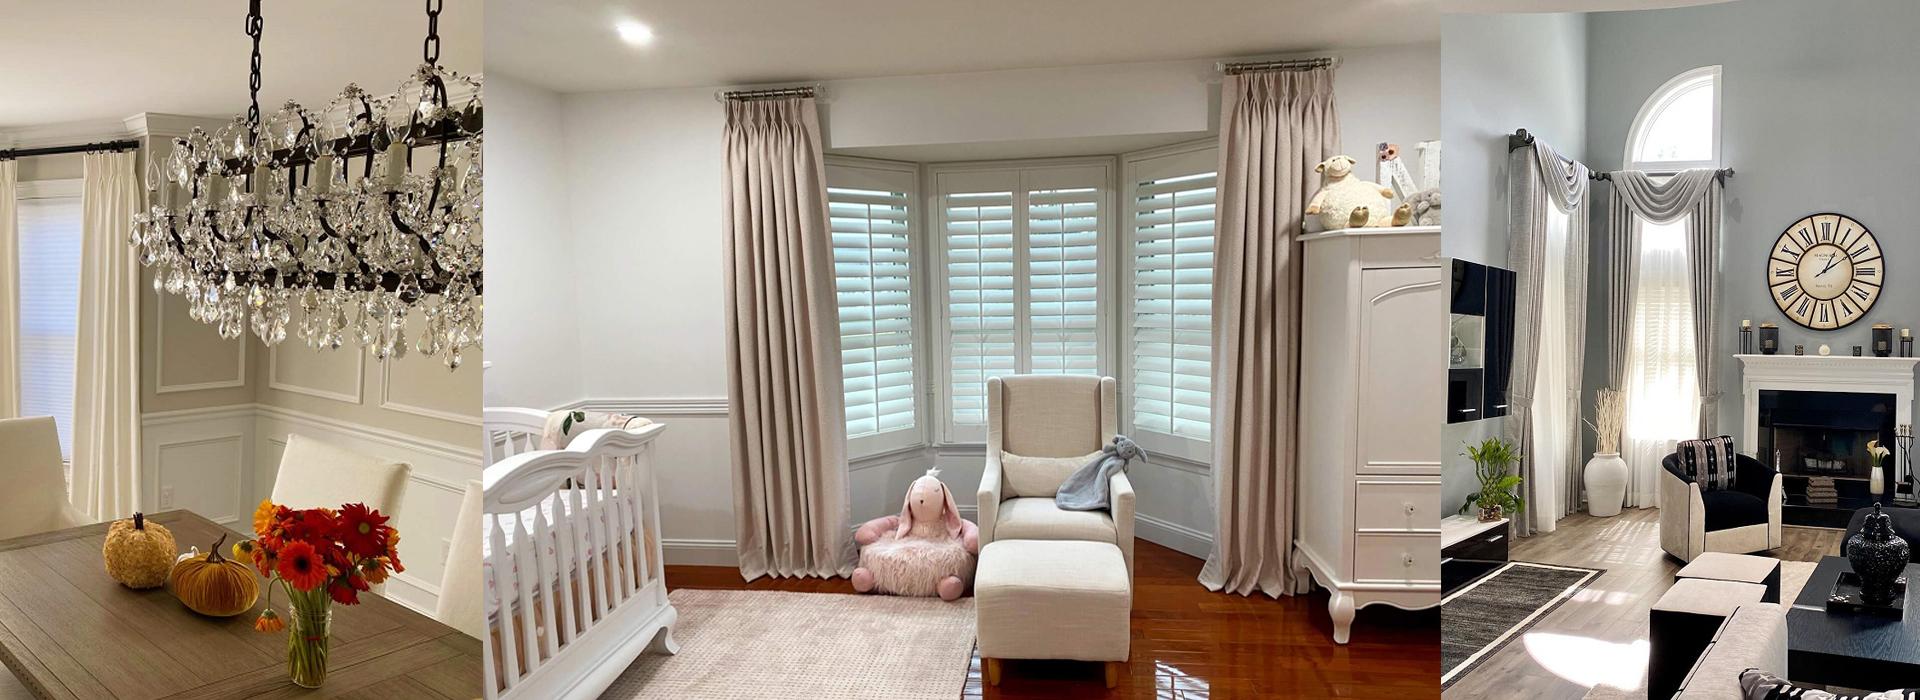 Monmouth County window treatments coverings installer blinds drapery installation NJ store